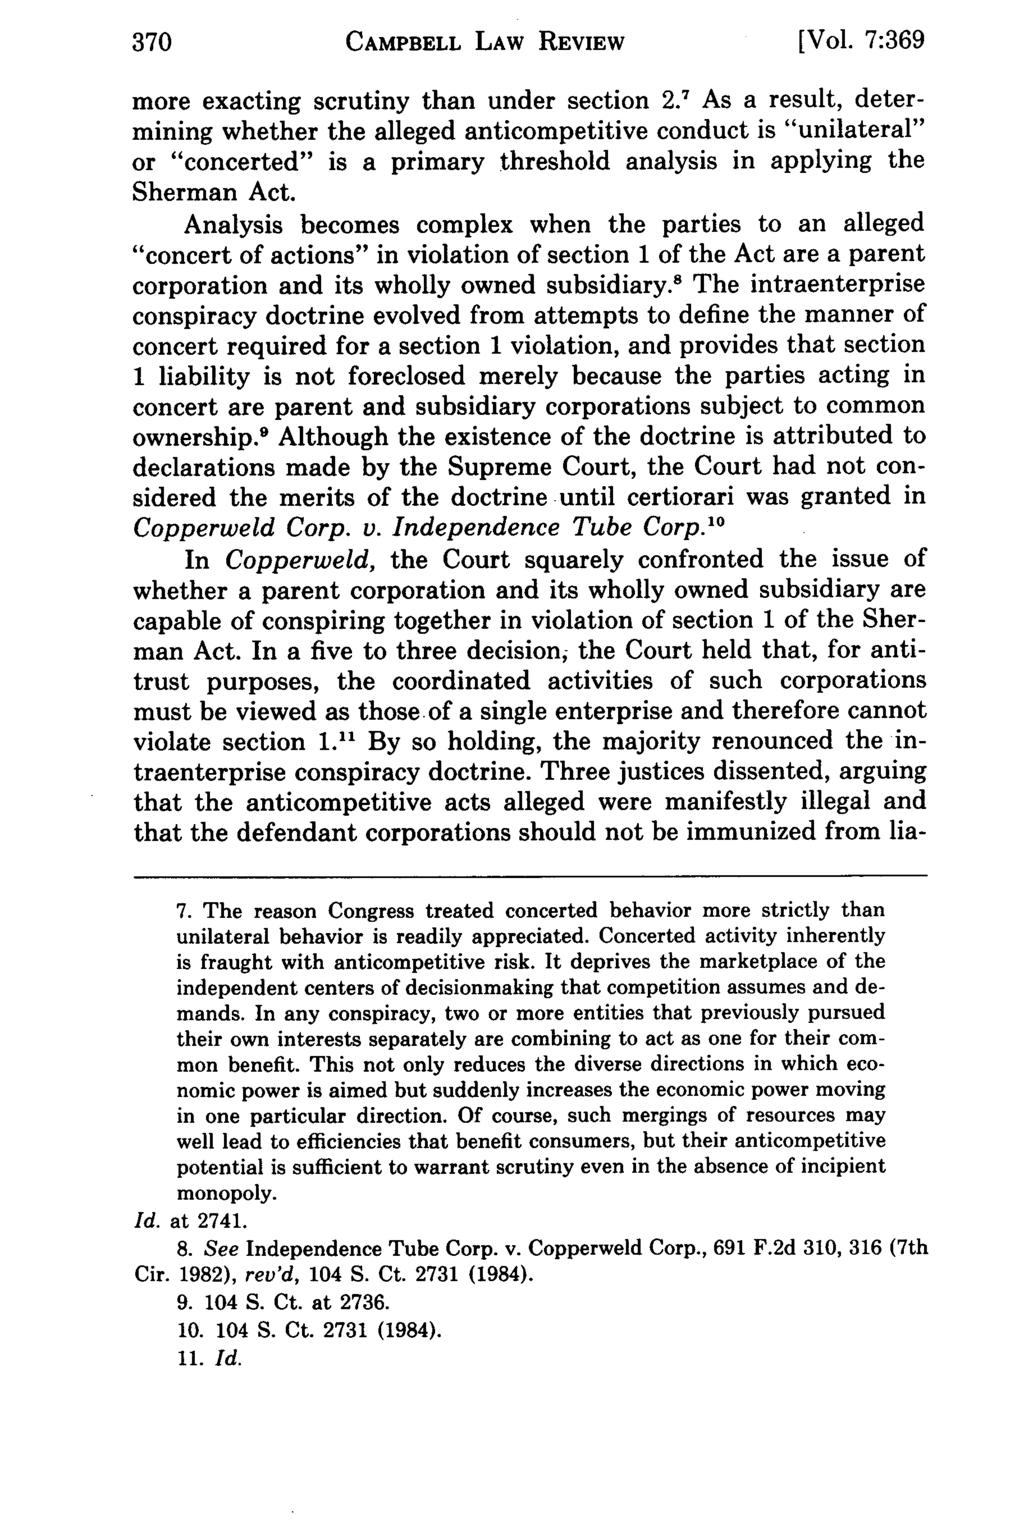 370 CAMPBELL LAW REVIEW Campbell Law Review, Vol. 7, Iss. 3 [1985], Art. 4 [Vol. 7:369 more exacting scrutiny than under section 2.